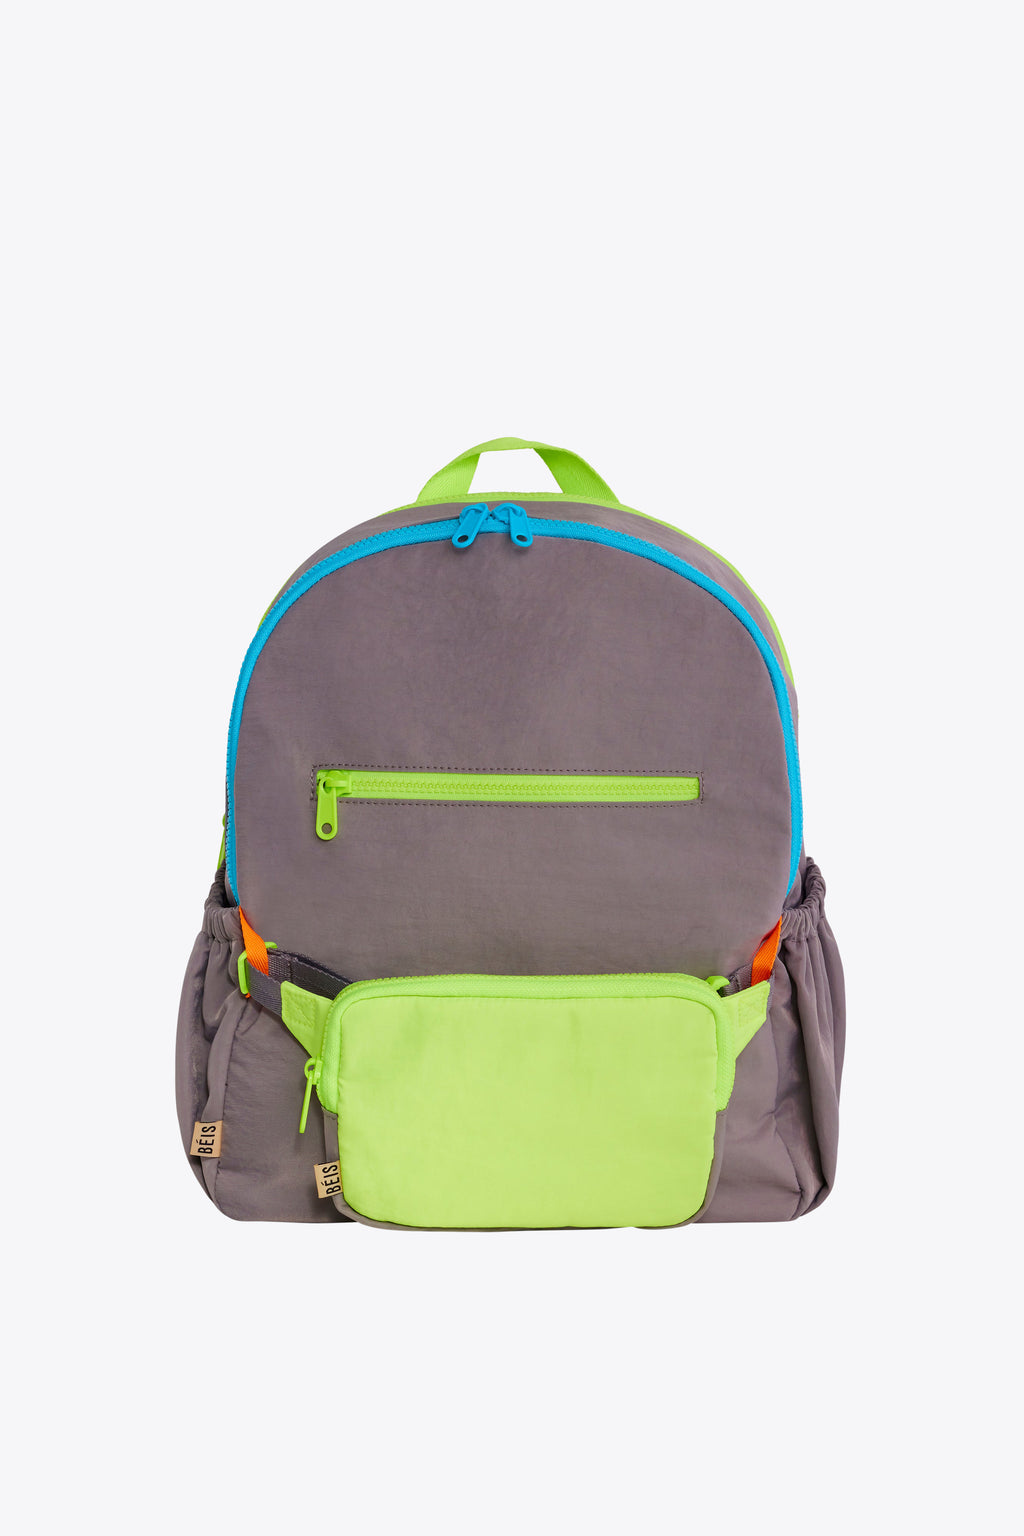 BÉIS 'The Kids Backpack' in Grey - Cool Travel Backpacks For Kids